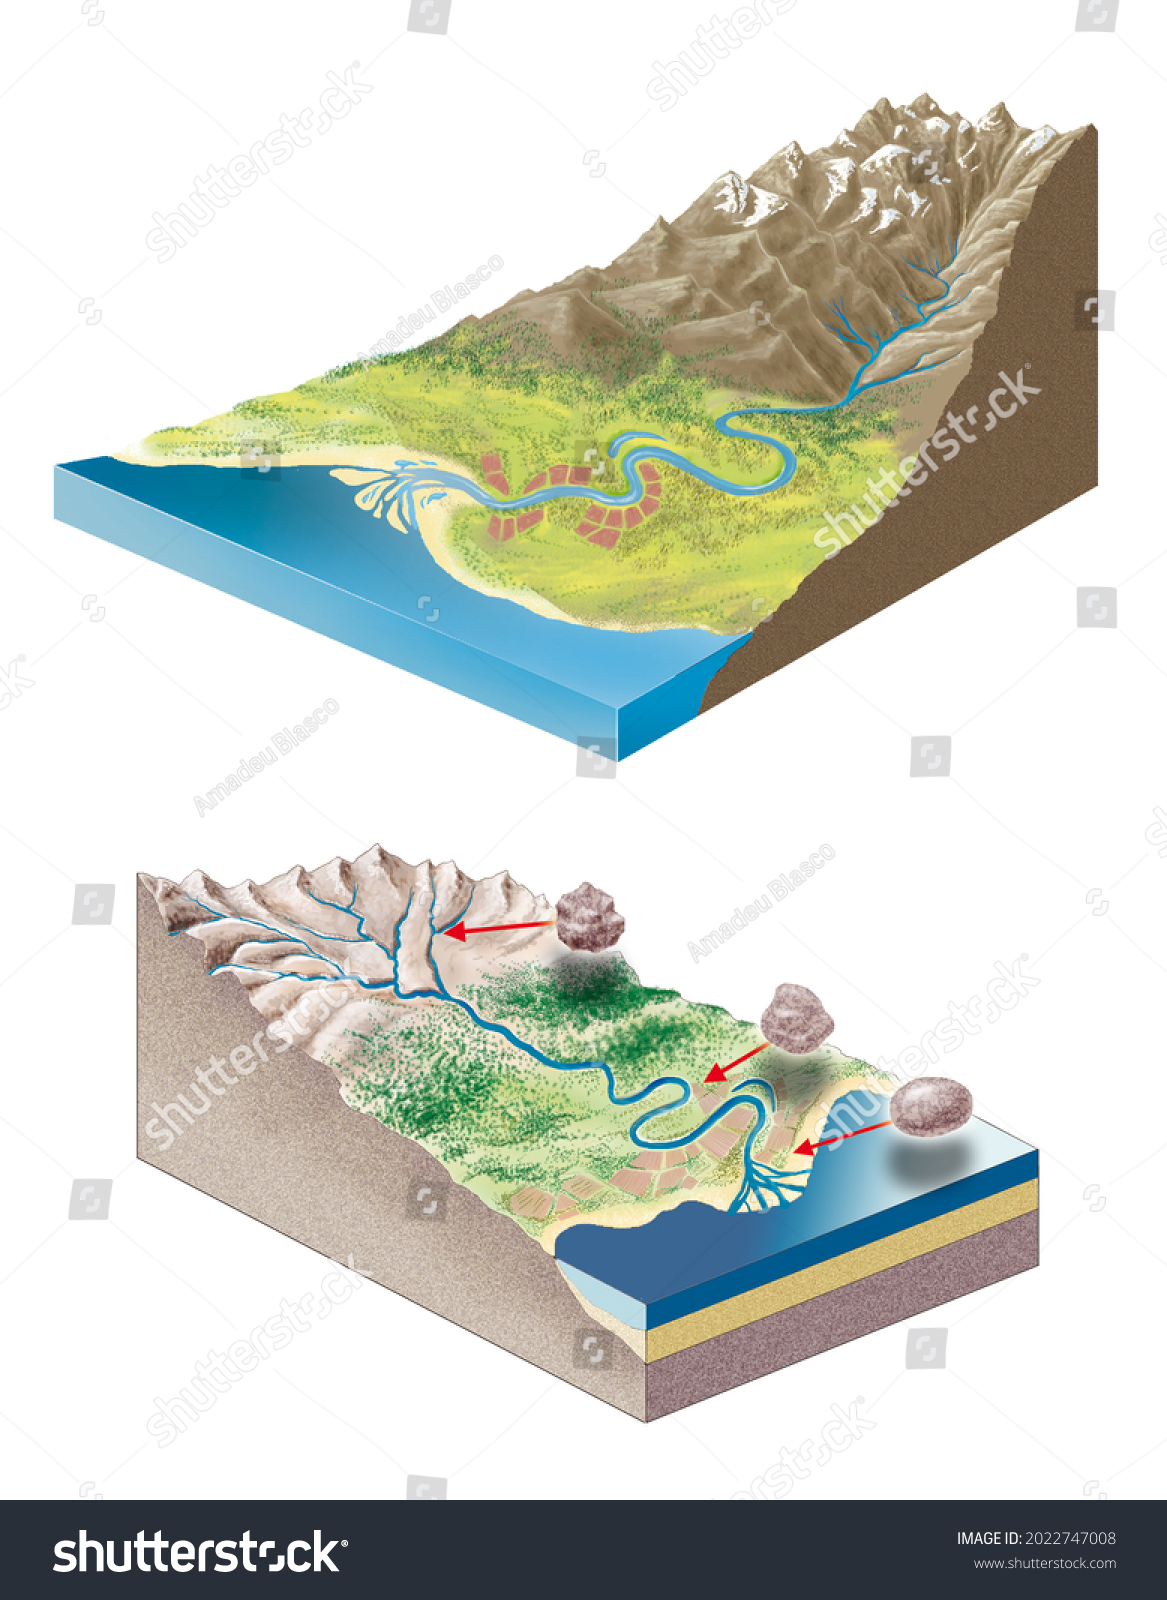 Geology Superficial Waters Course River Structure Stock Illustration ...